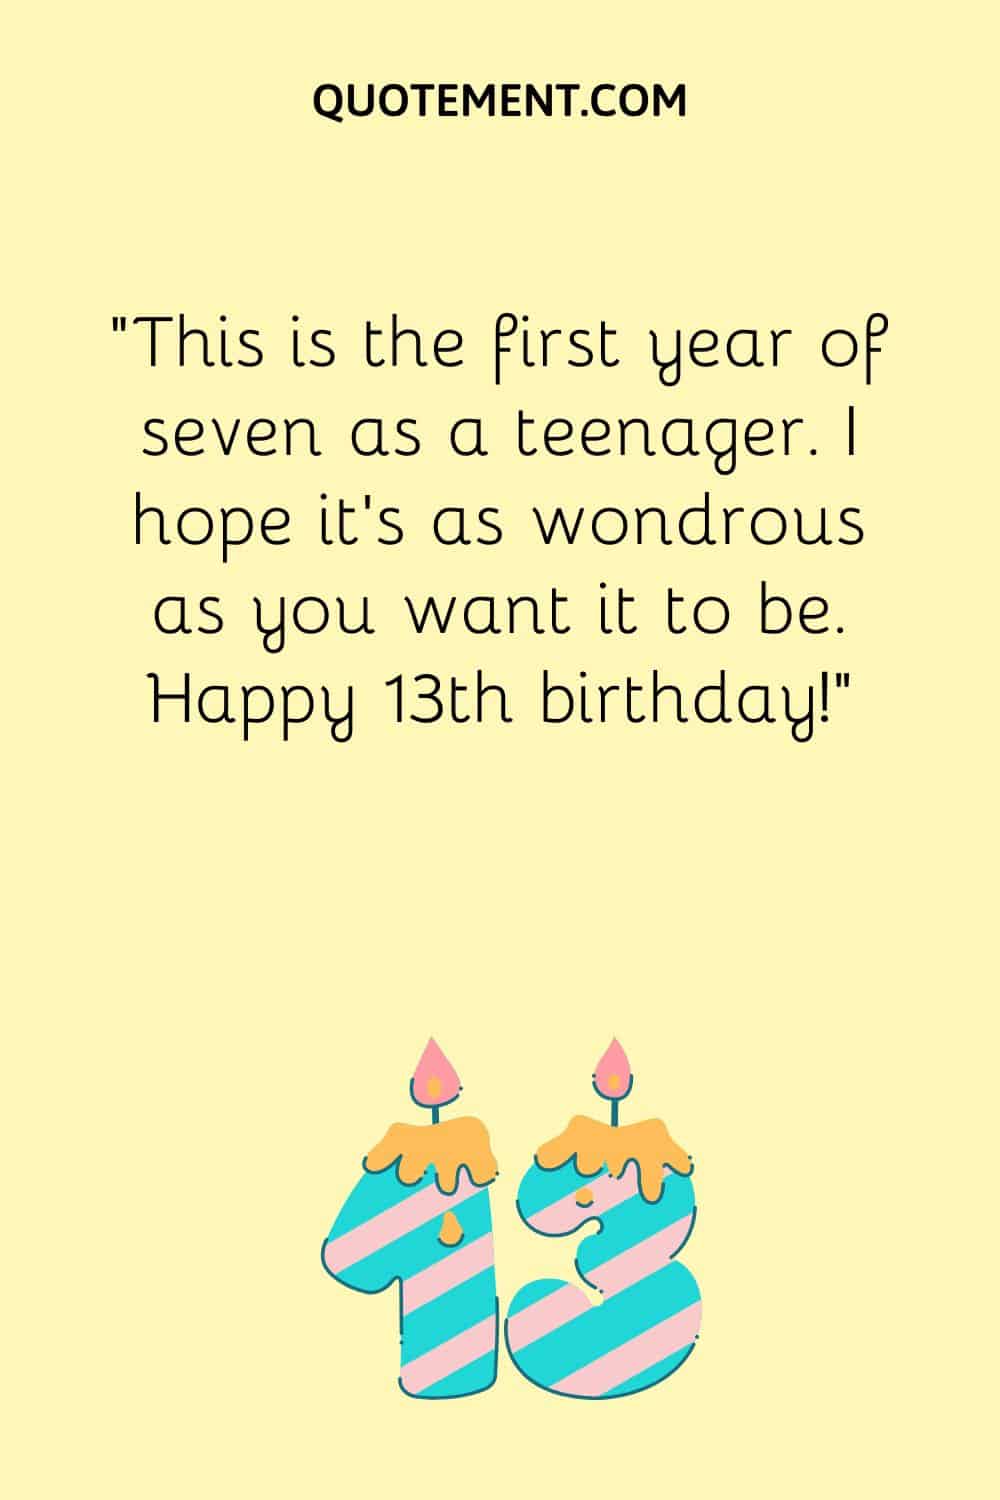 This is the first year of seven as a teenager. I hope it’s as wondrous as you want it to be